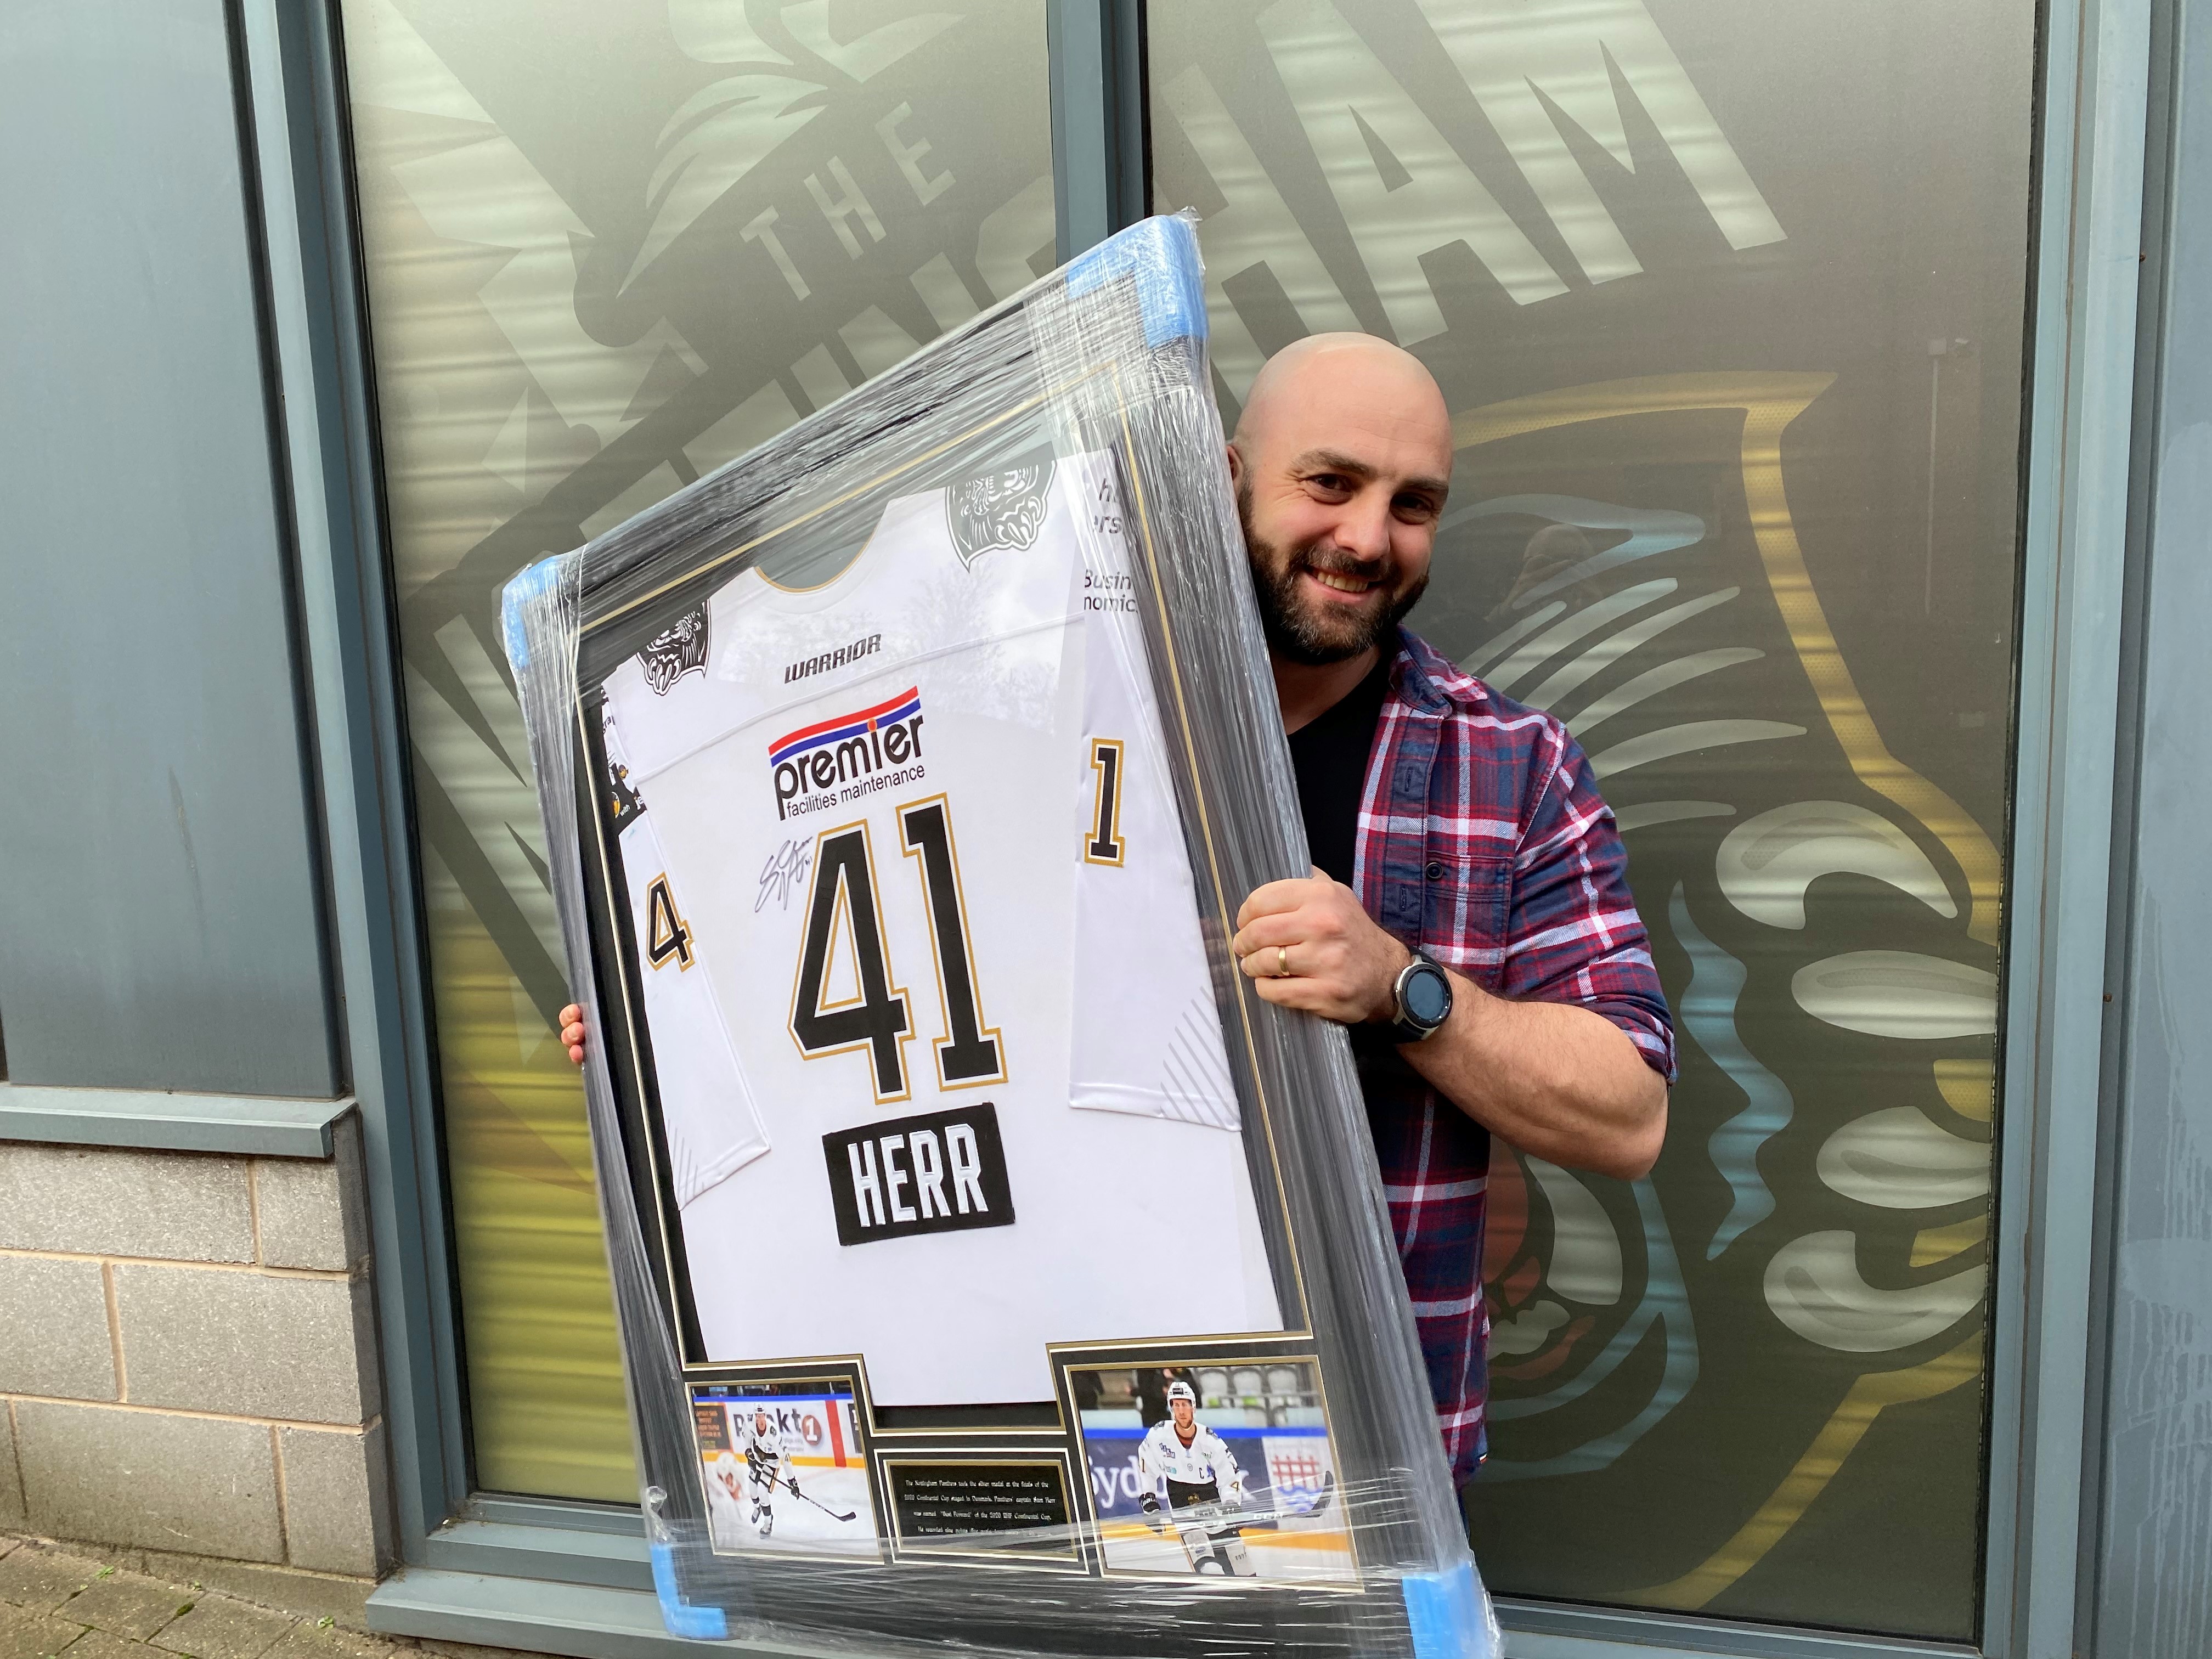 Win a signed/framed jersey in this week's raffle :: Cardiff Devils